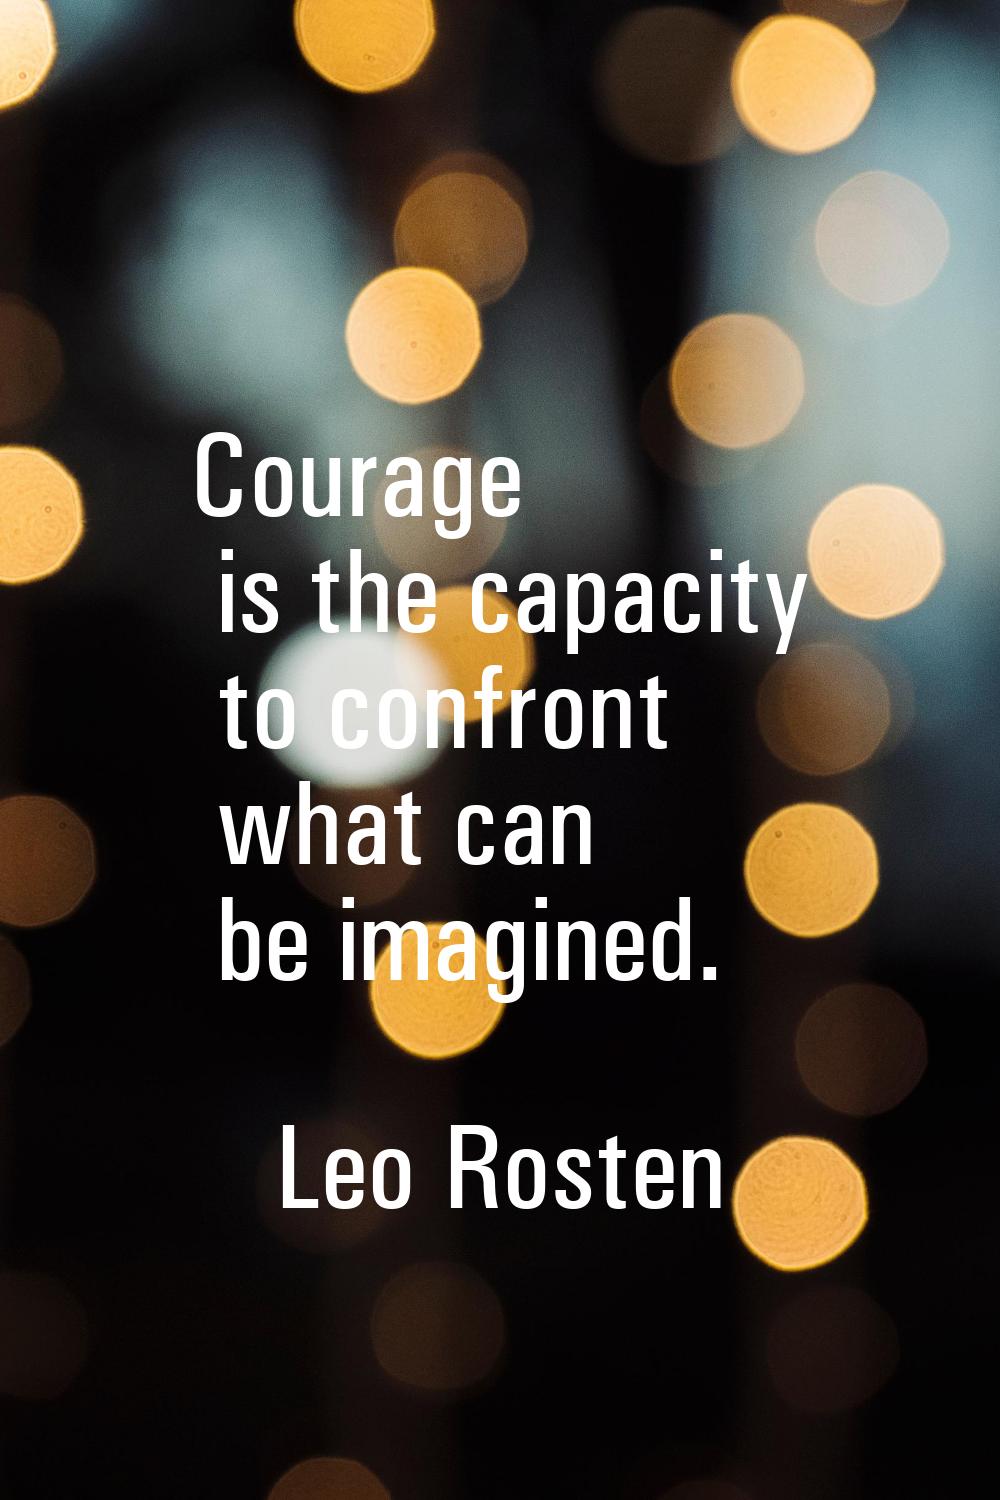 Courage is the capacity to confront what can be imagined.